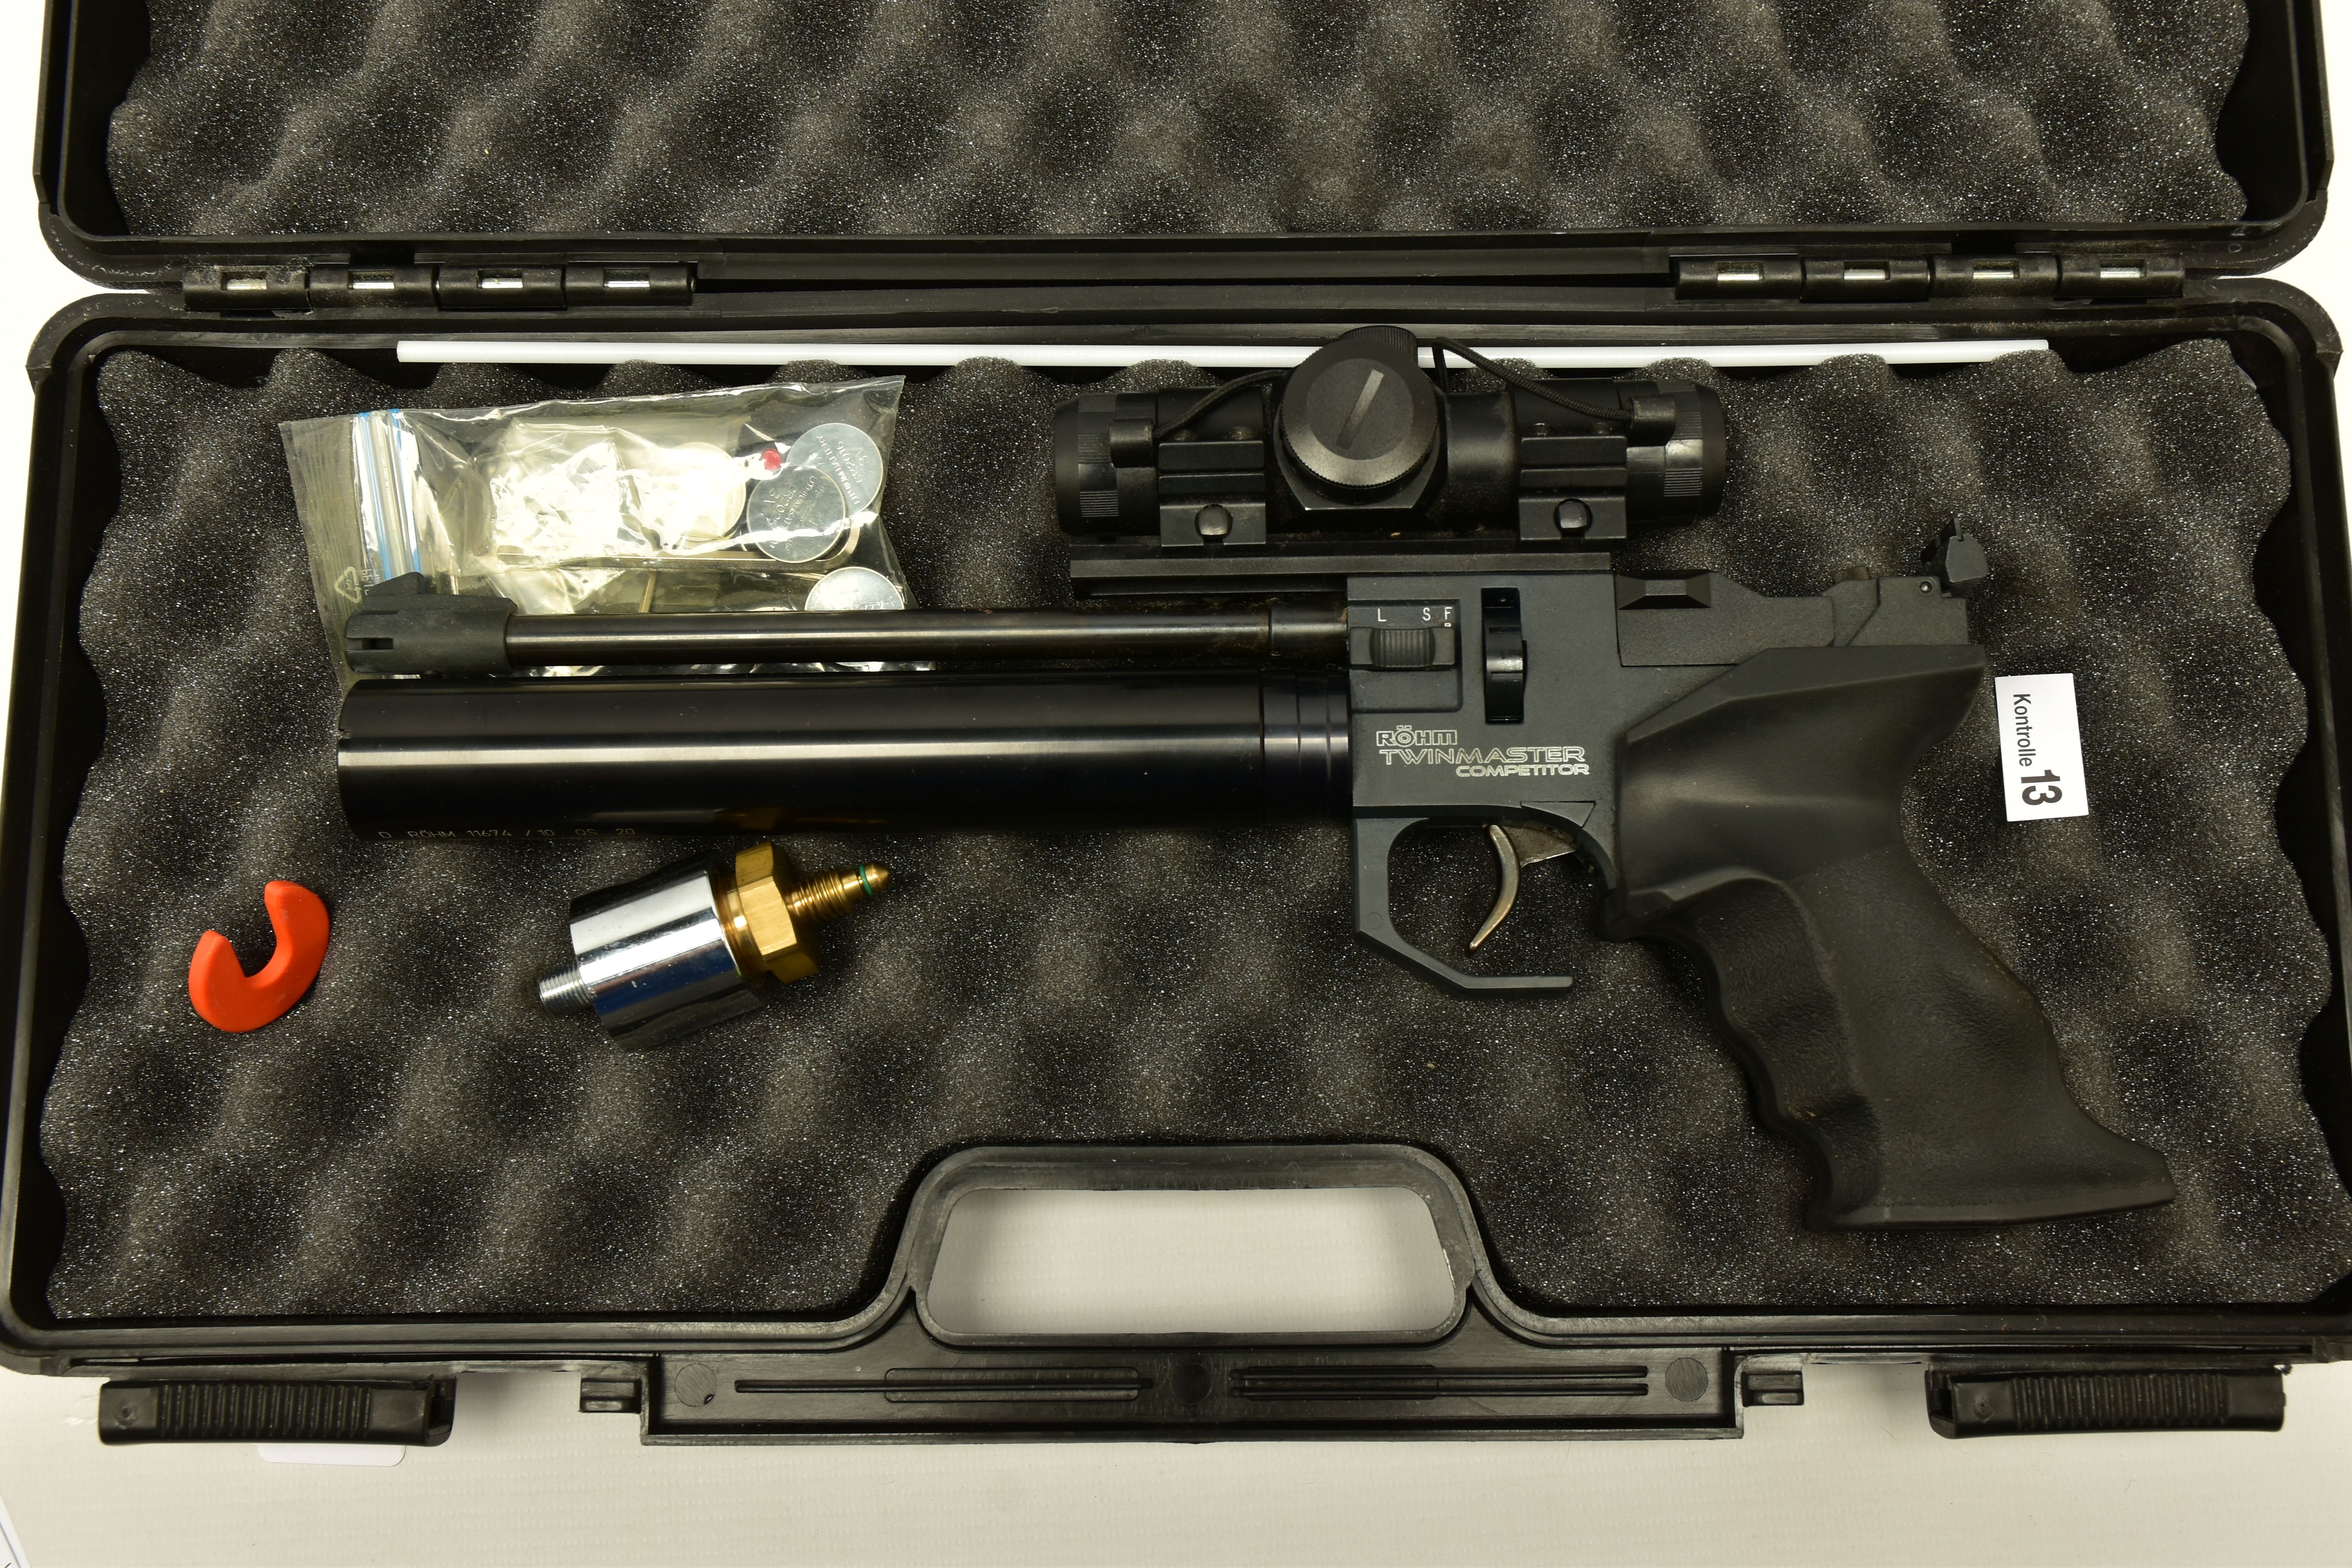 A .177'' CO2 HIGH QUALITY ROHM TWINMASTER COMPETITOR AIR PISTOL, serial number RU102101137 fitted